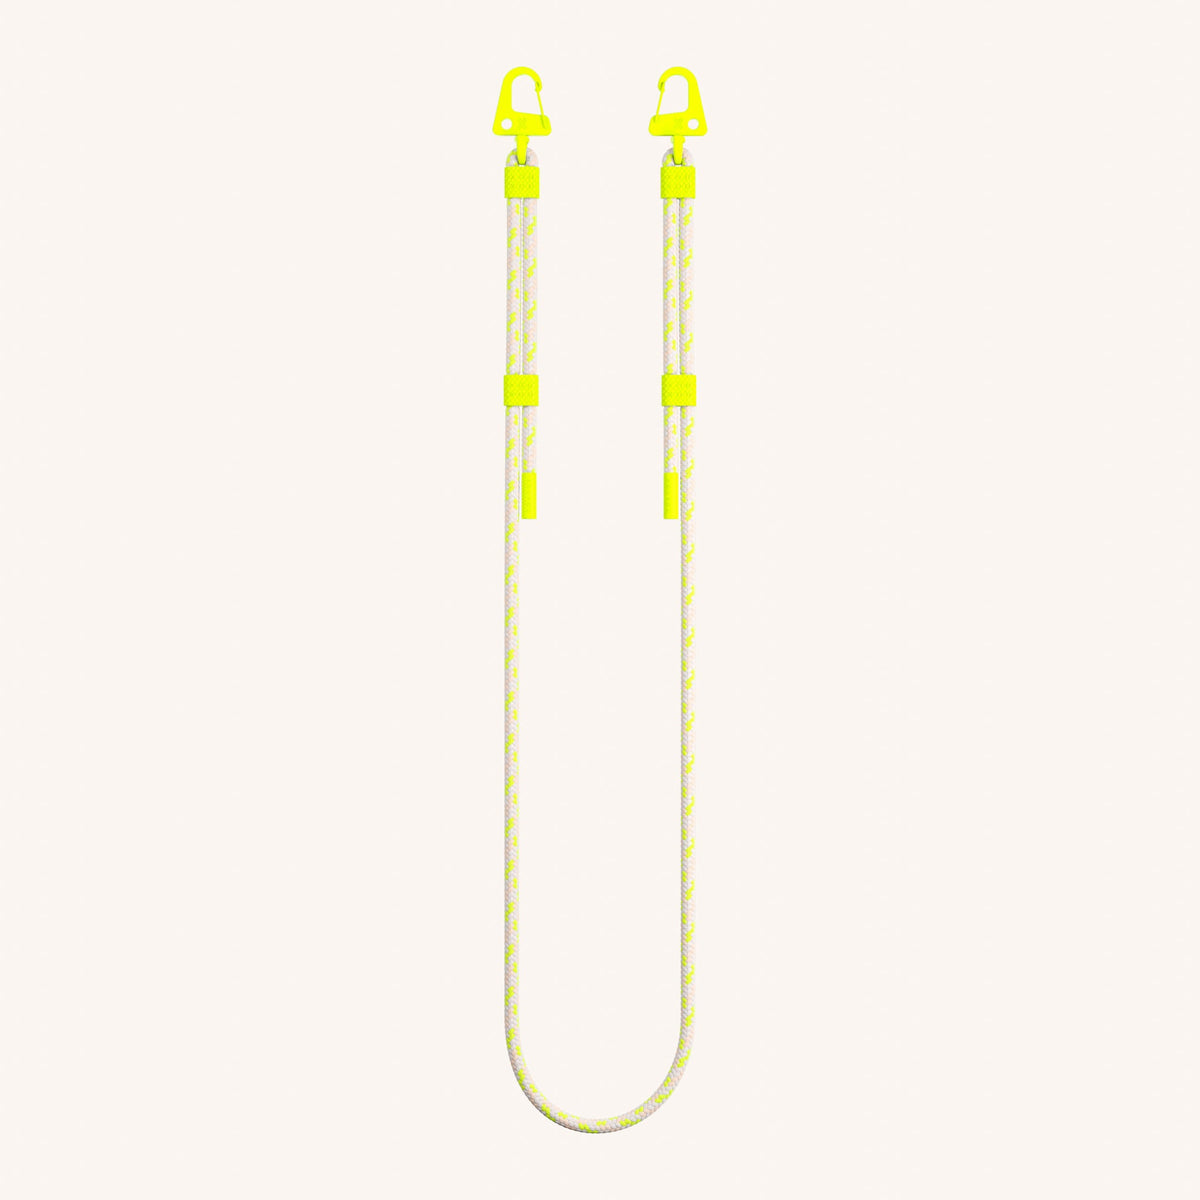 Phone Strap Carabiner Rope in Neon Camouflage Total View | XOUXOU